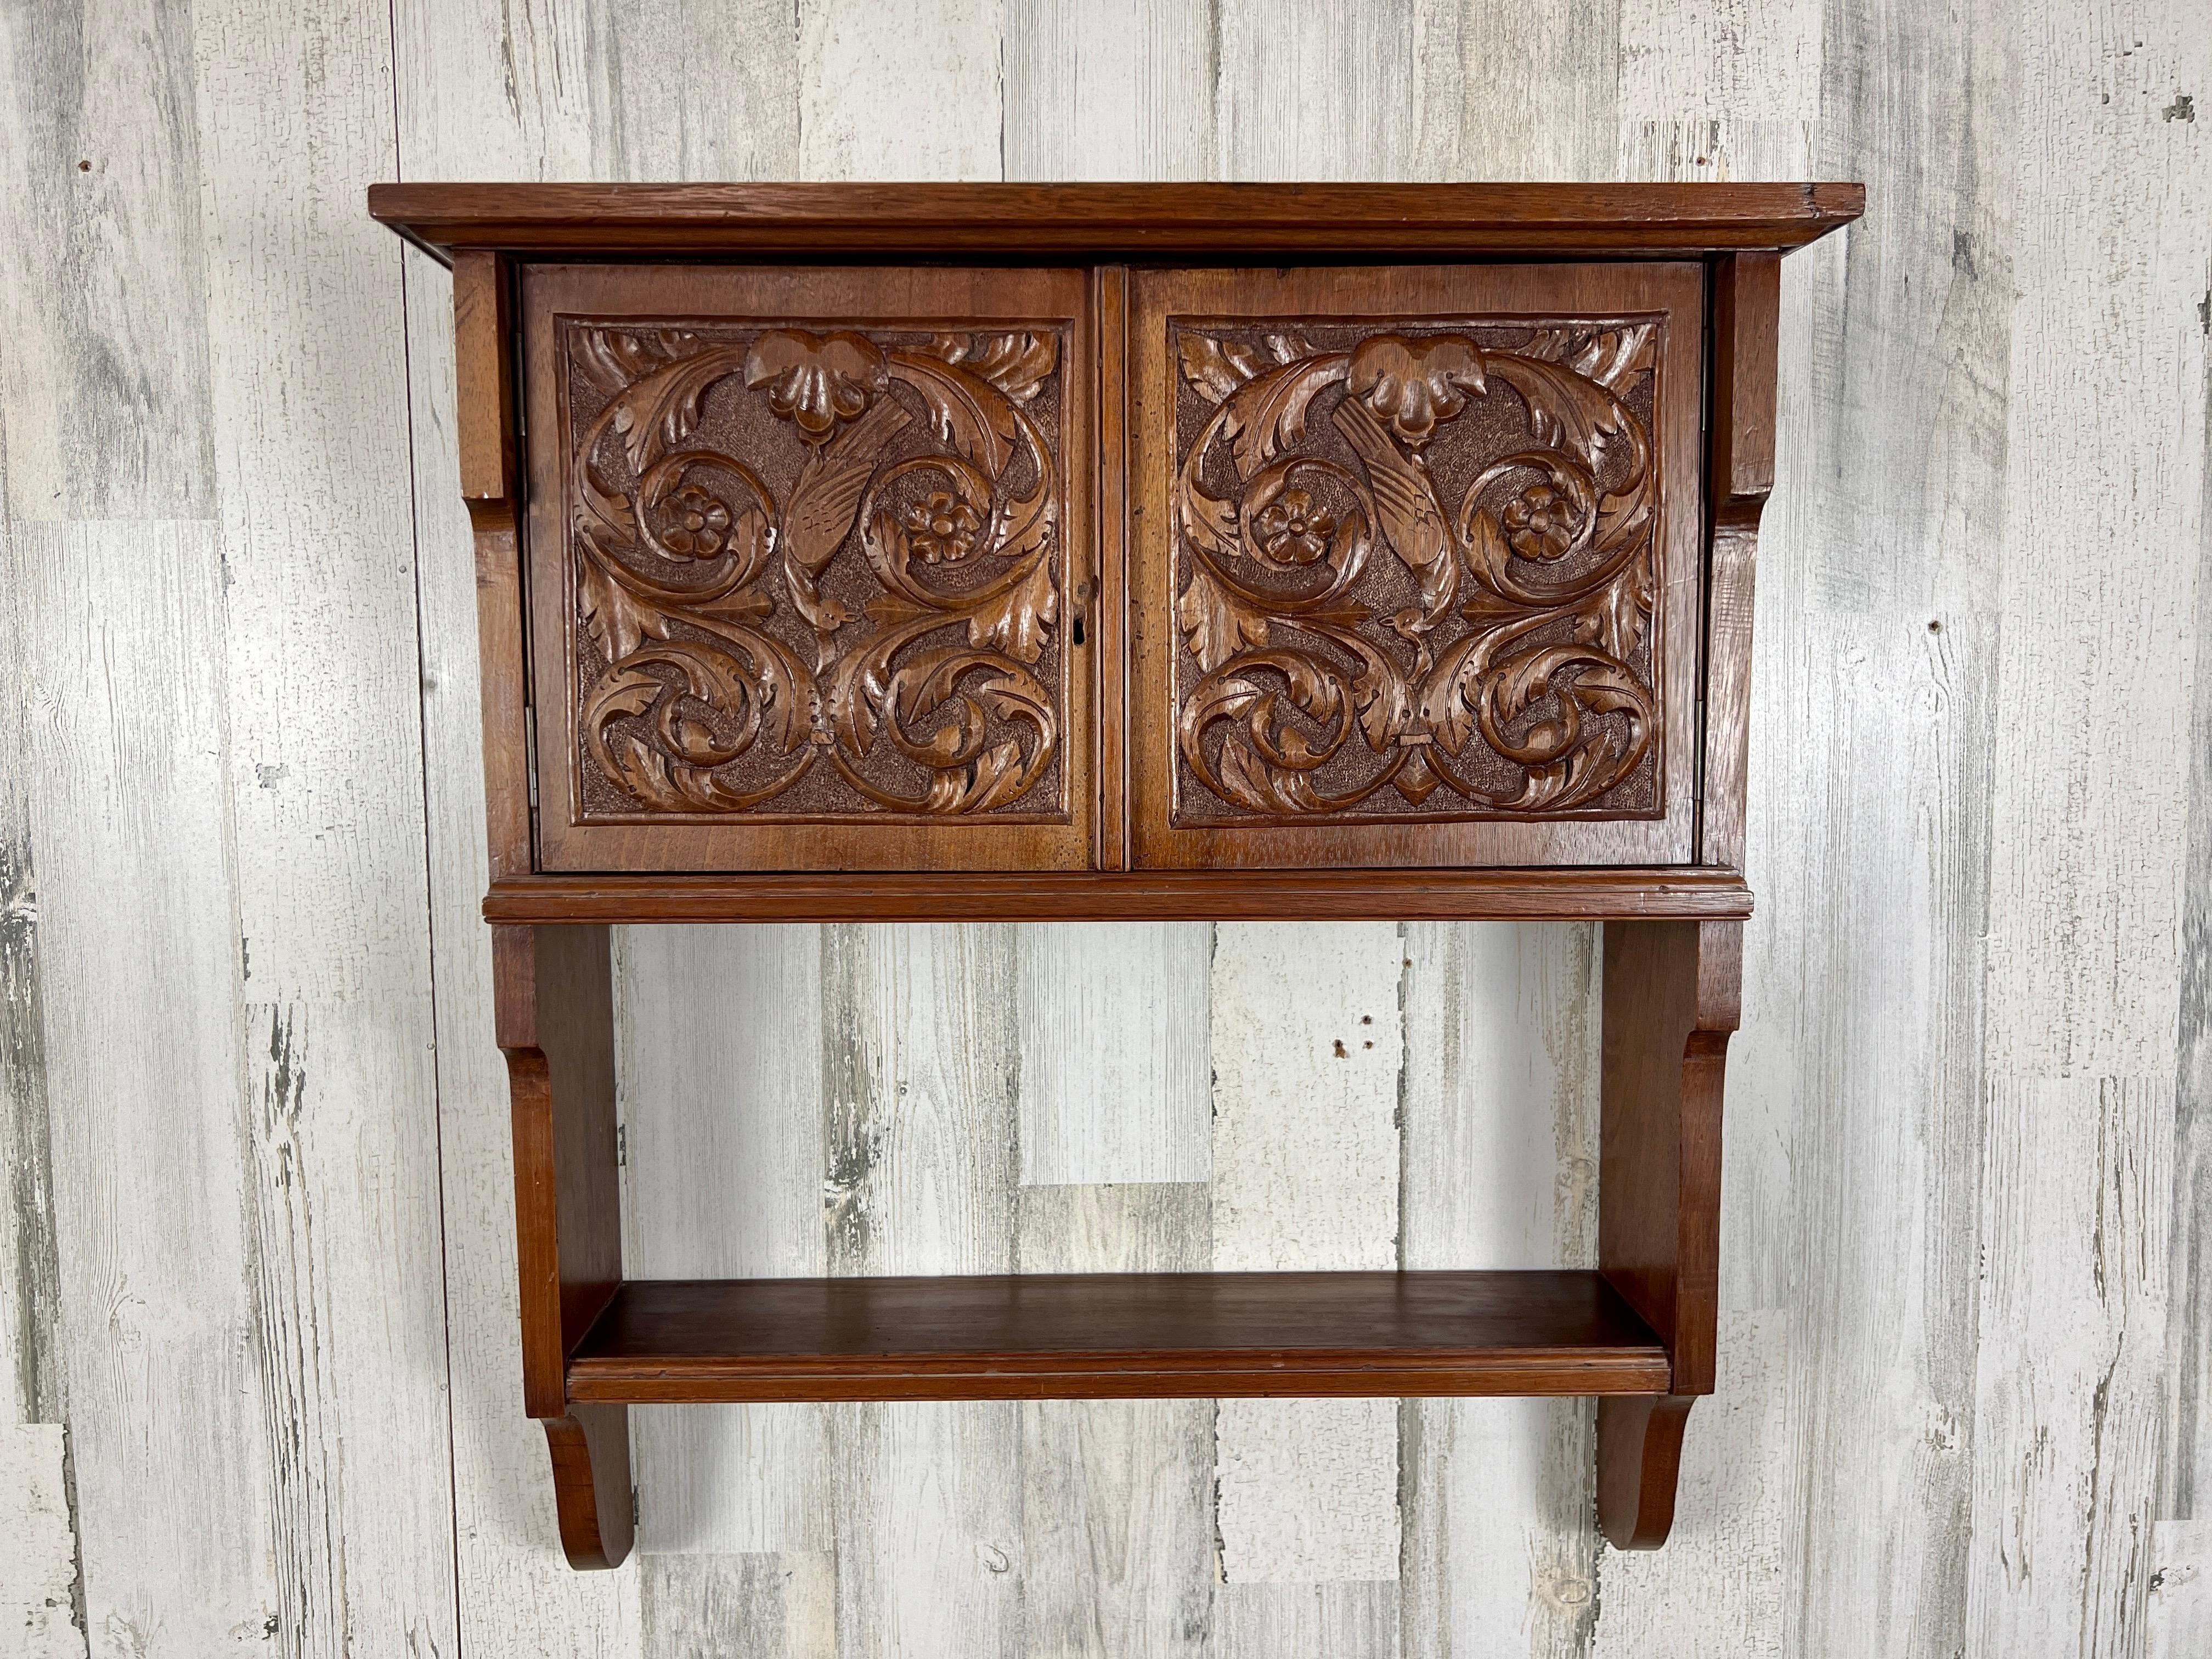 Hand carved solid walnut hanging wall cabinet  with two carved doors and a shelf down below probably made in France or Belgium.  Circa 1920